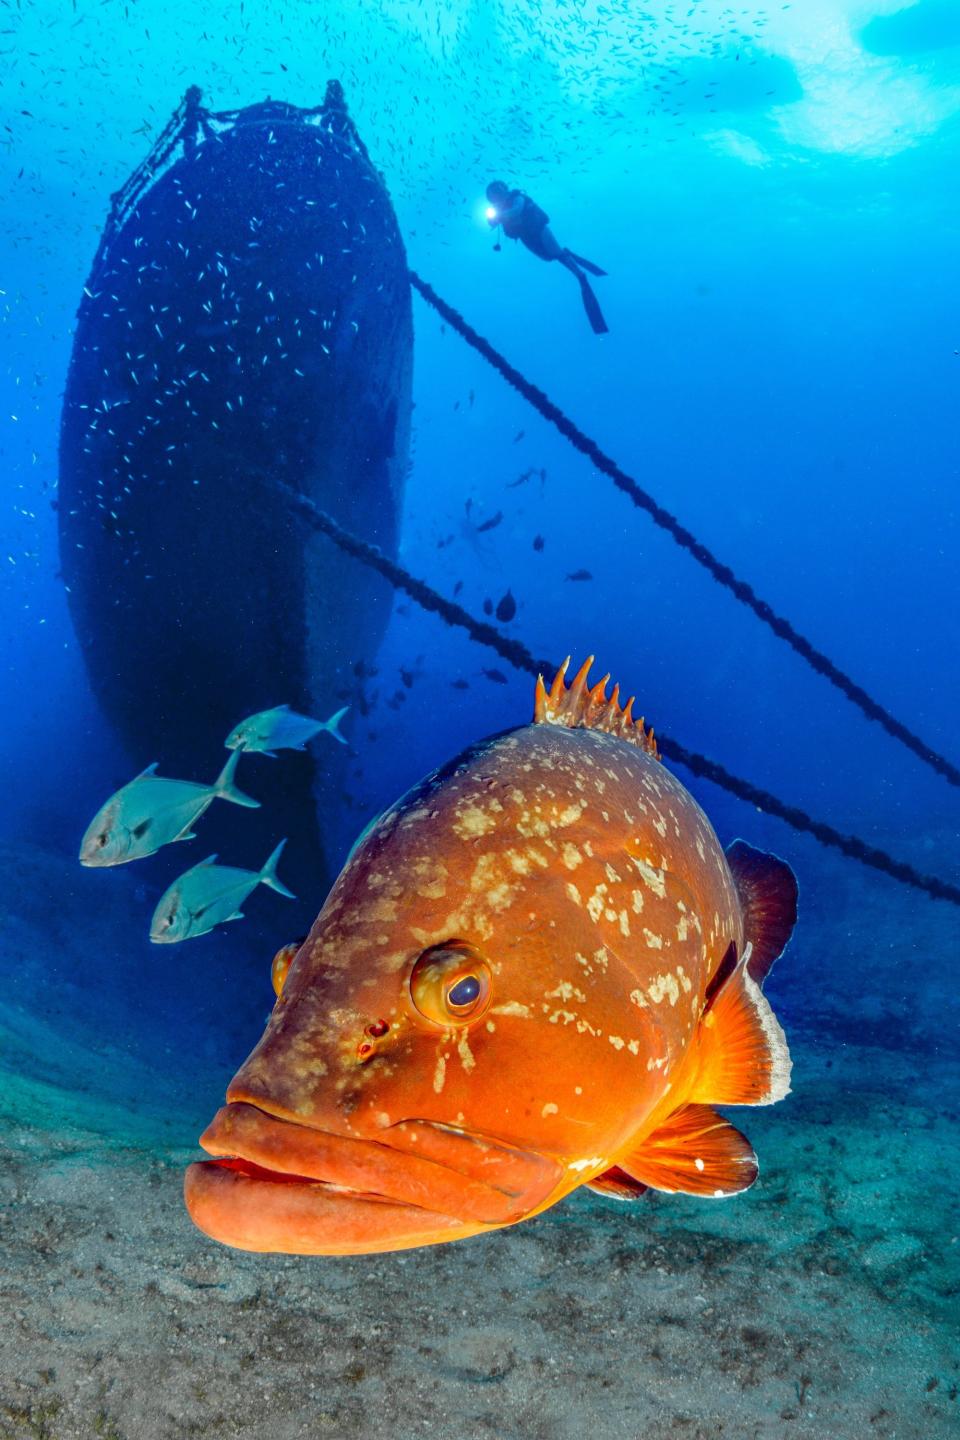 A giant perch in front of a shipwreck with a diver. Panto Santo, Portugal.